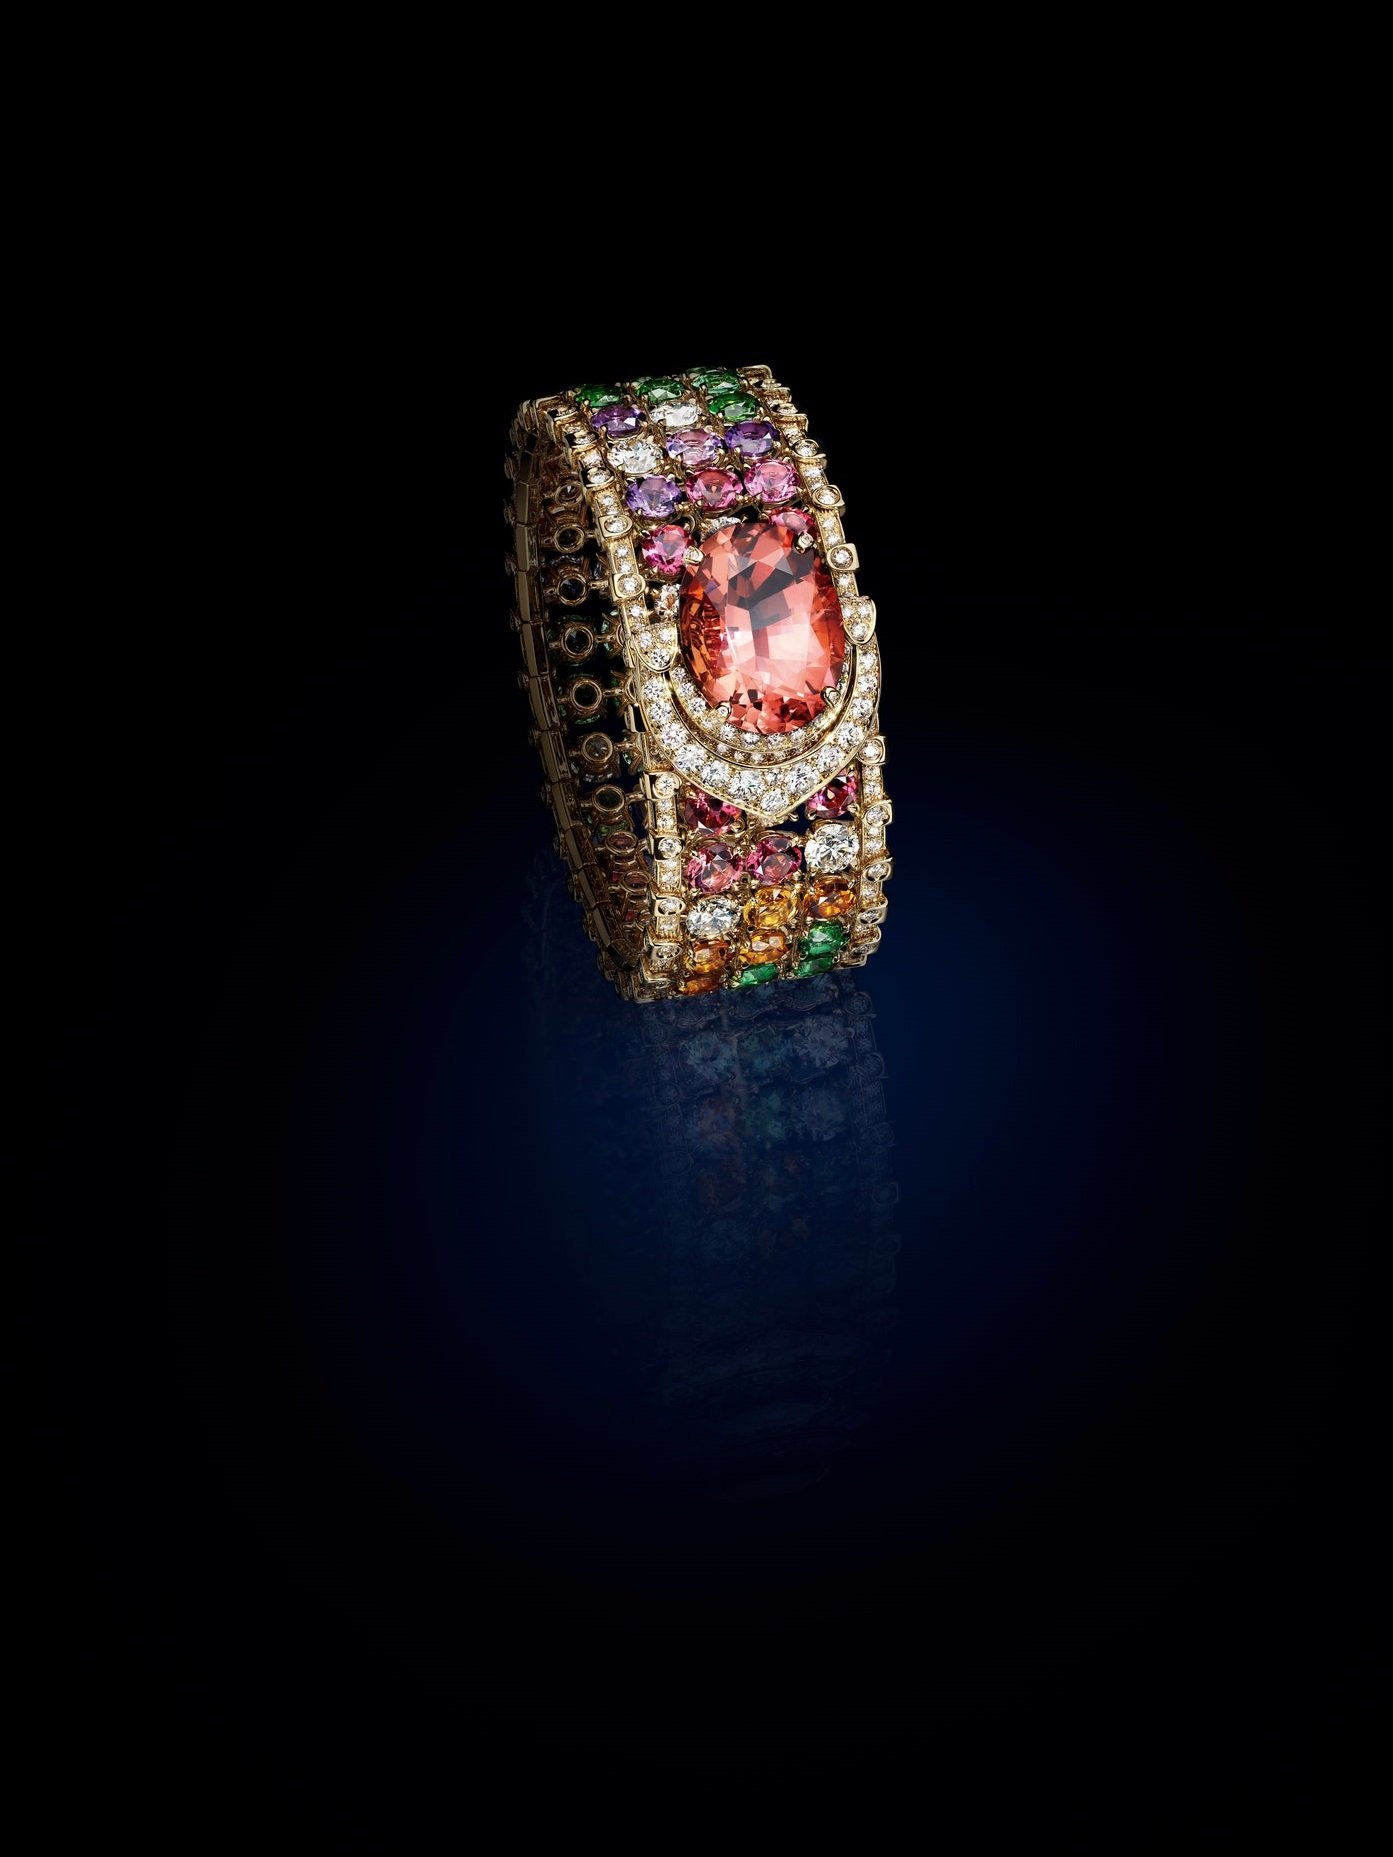 Louis Vuitton Bravery II High Jewellery Is Unadulterated High Art